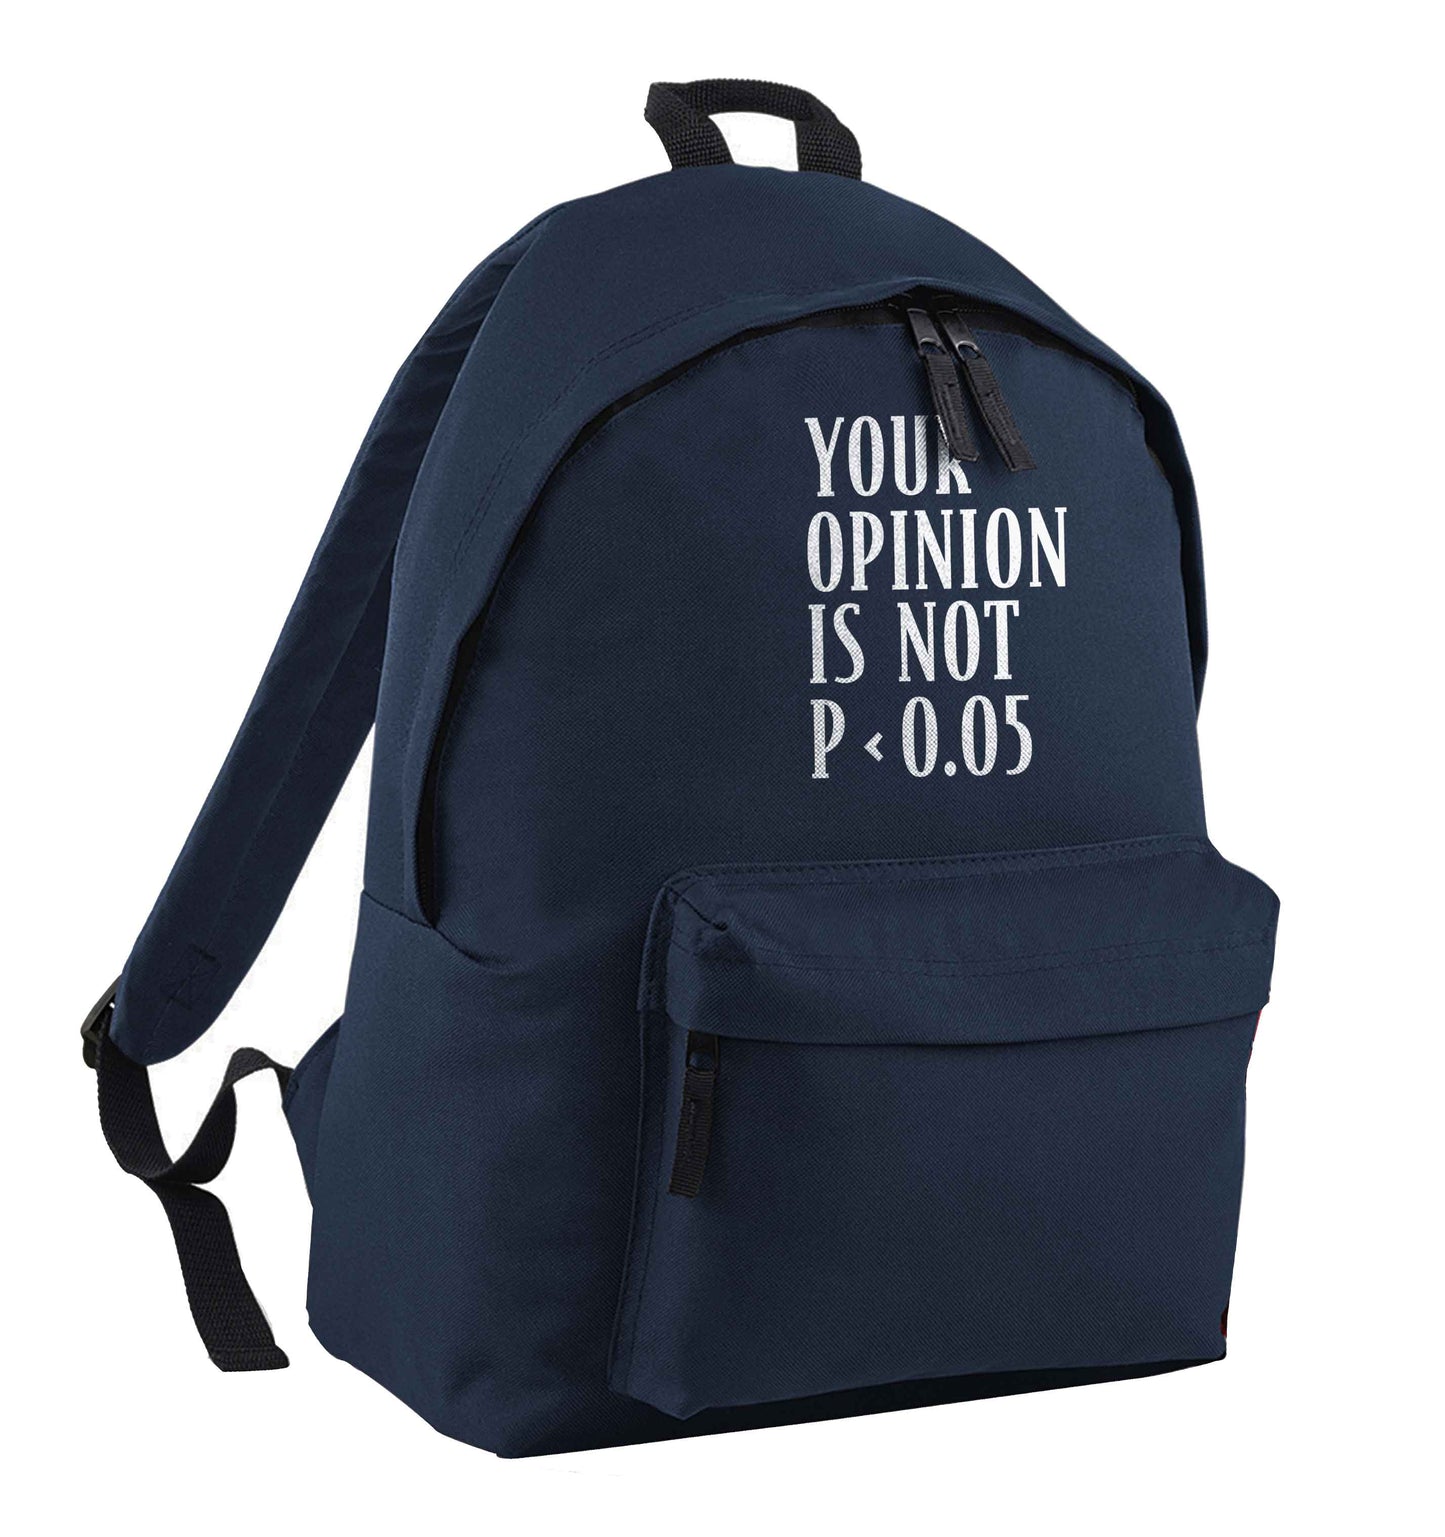 Your opinion is not P < 0.05navy children's backpack